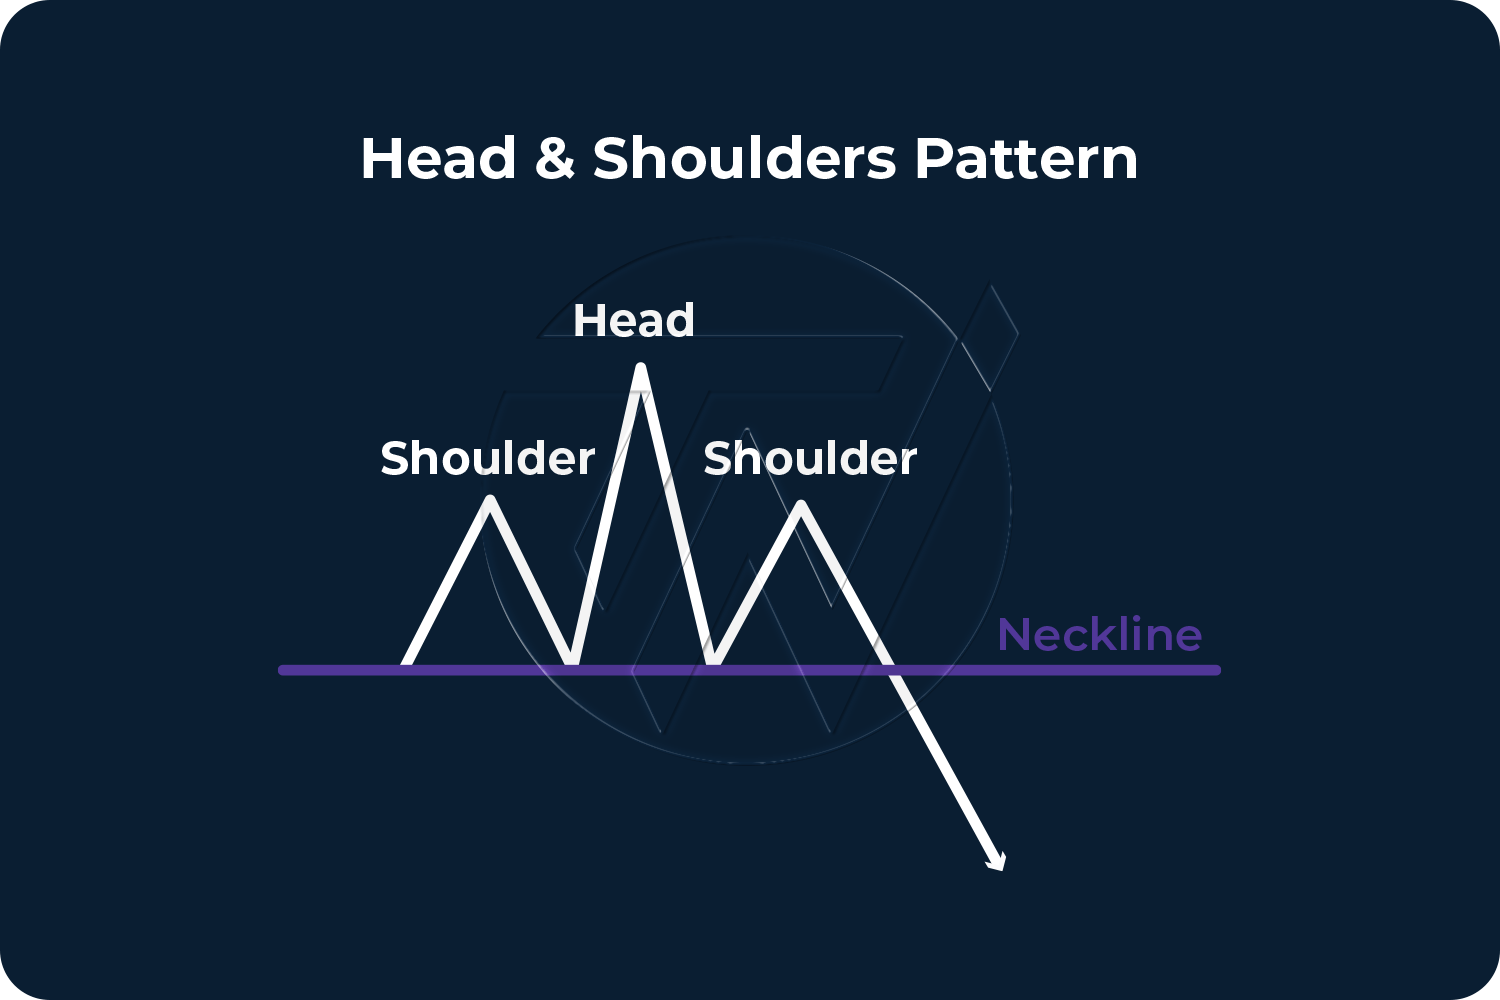 Head and Shoulders pattern illustration